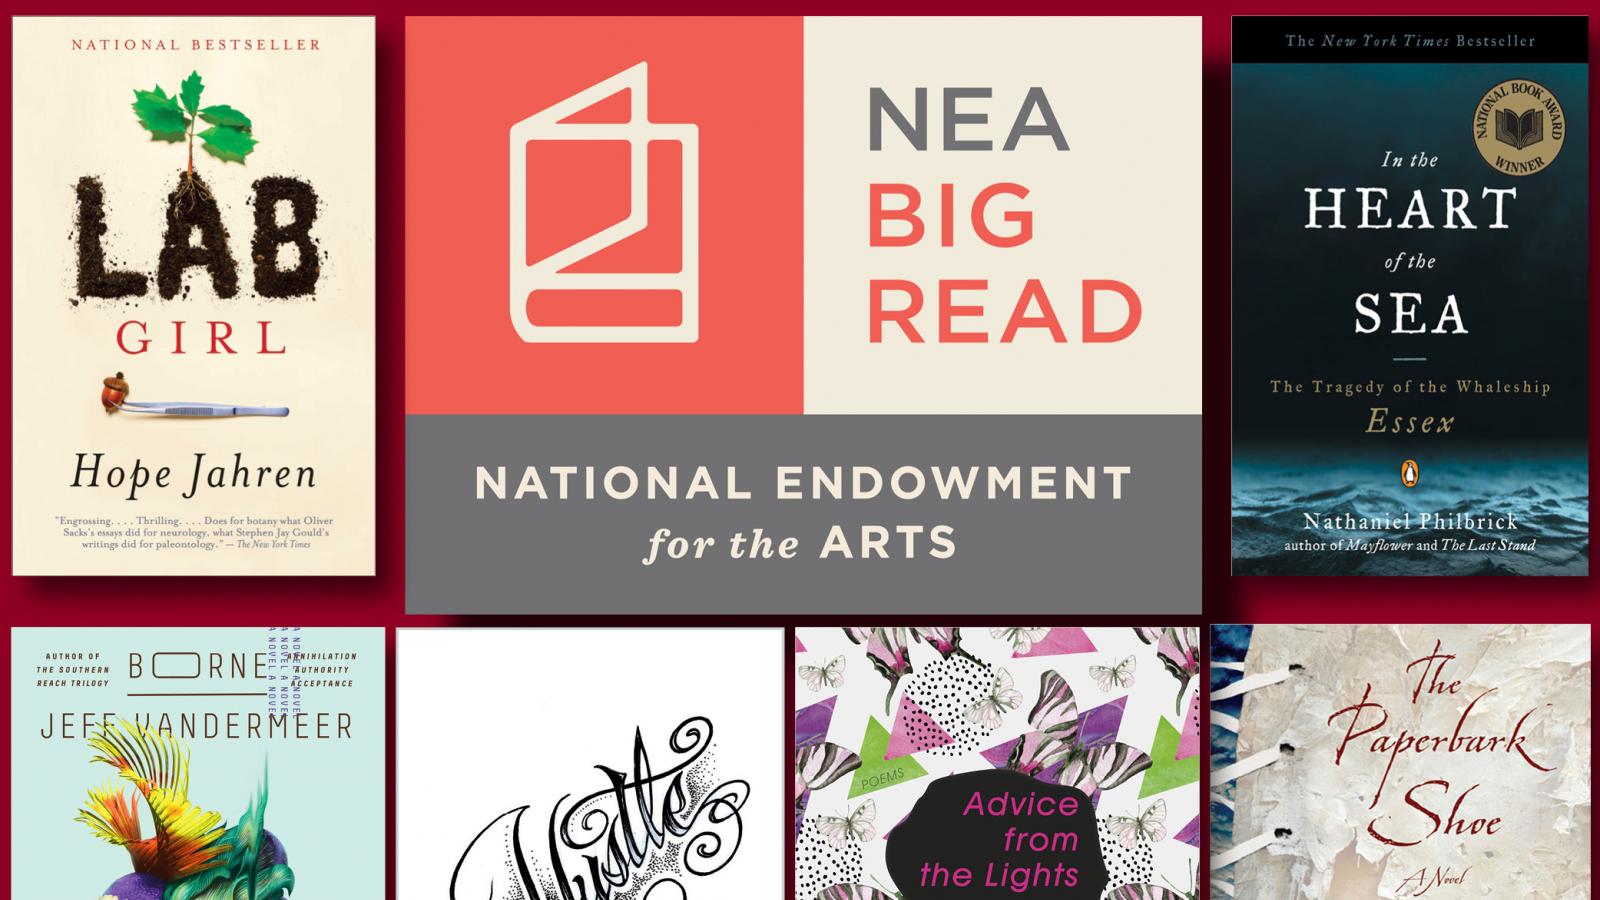 Image of six book covers with the NEA Big Read logo in the center.